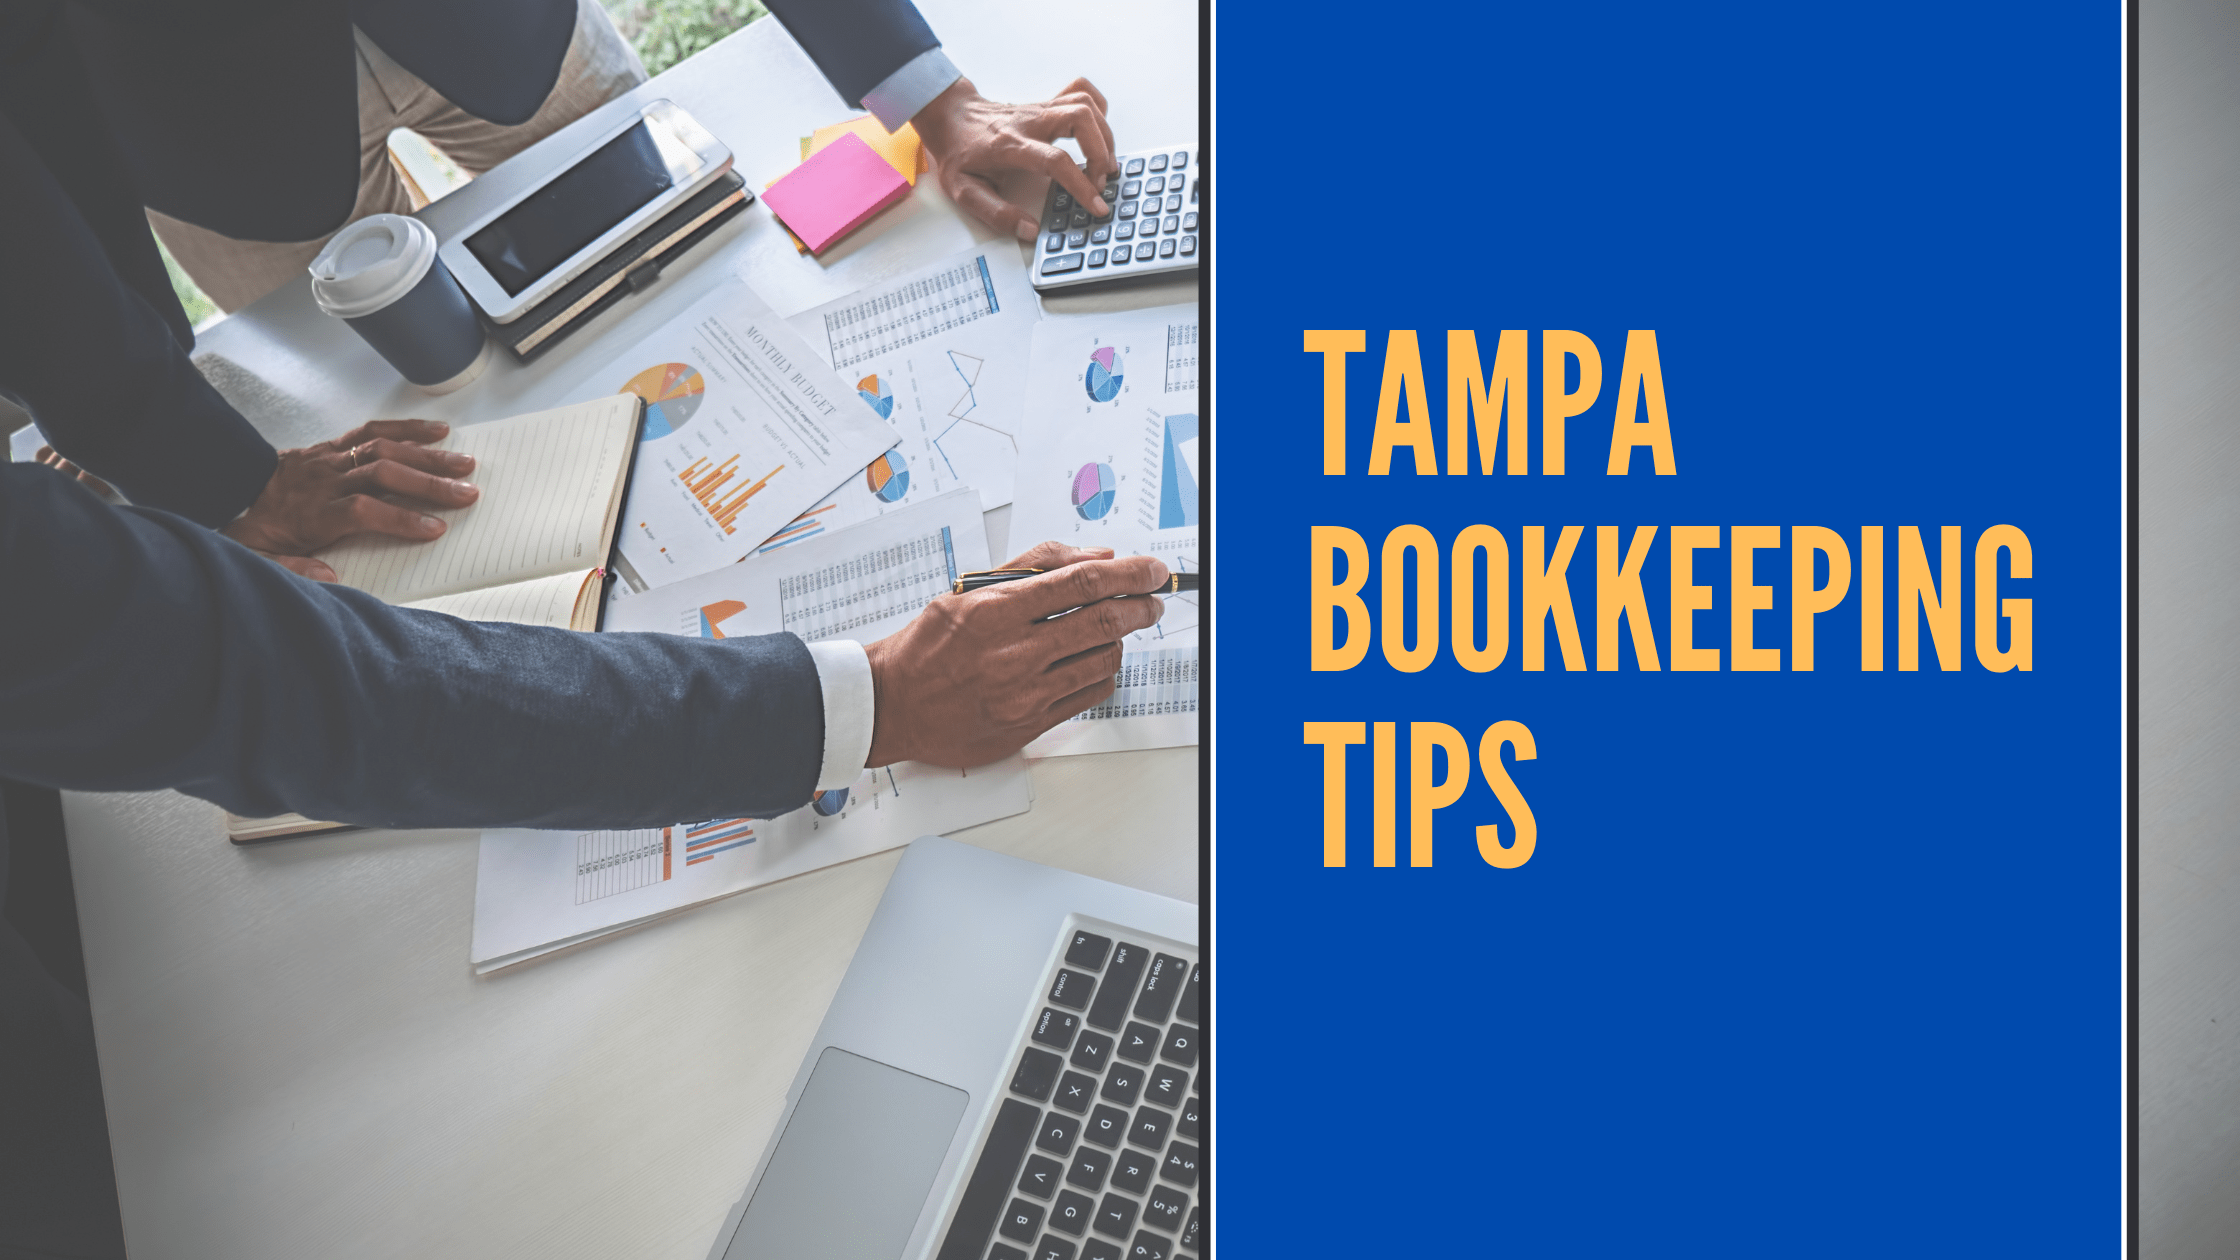 Tampa Bookkeeping Tips to Keep Your Small Business Finances in Order